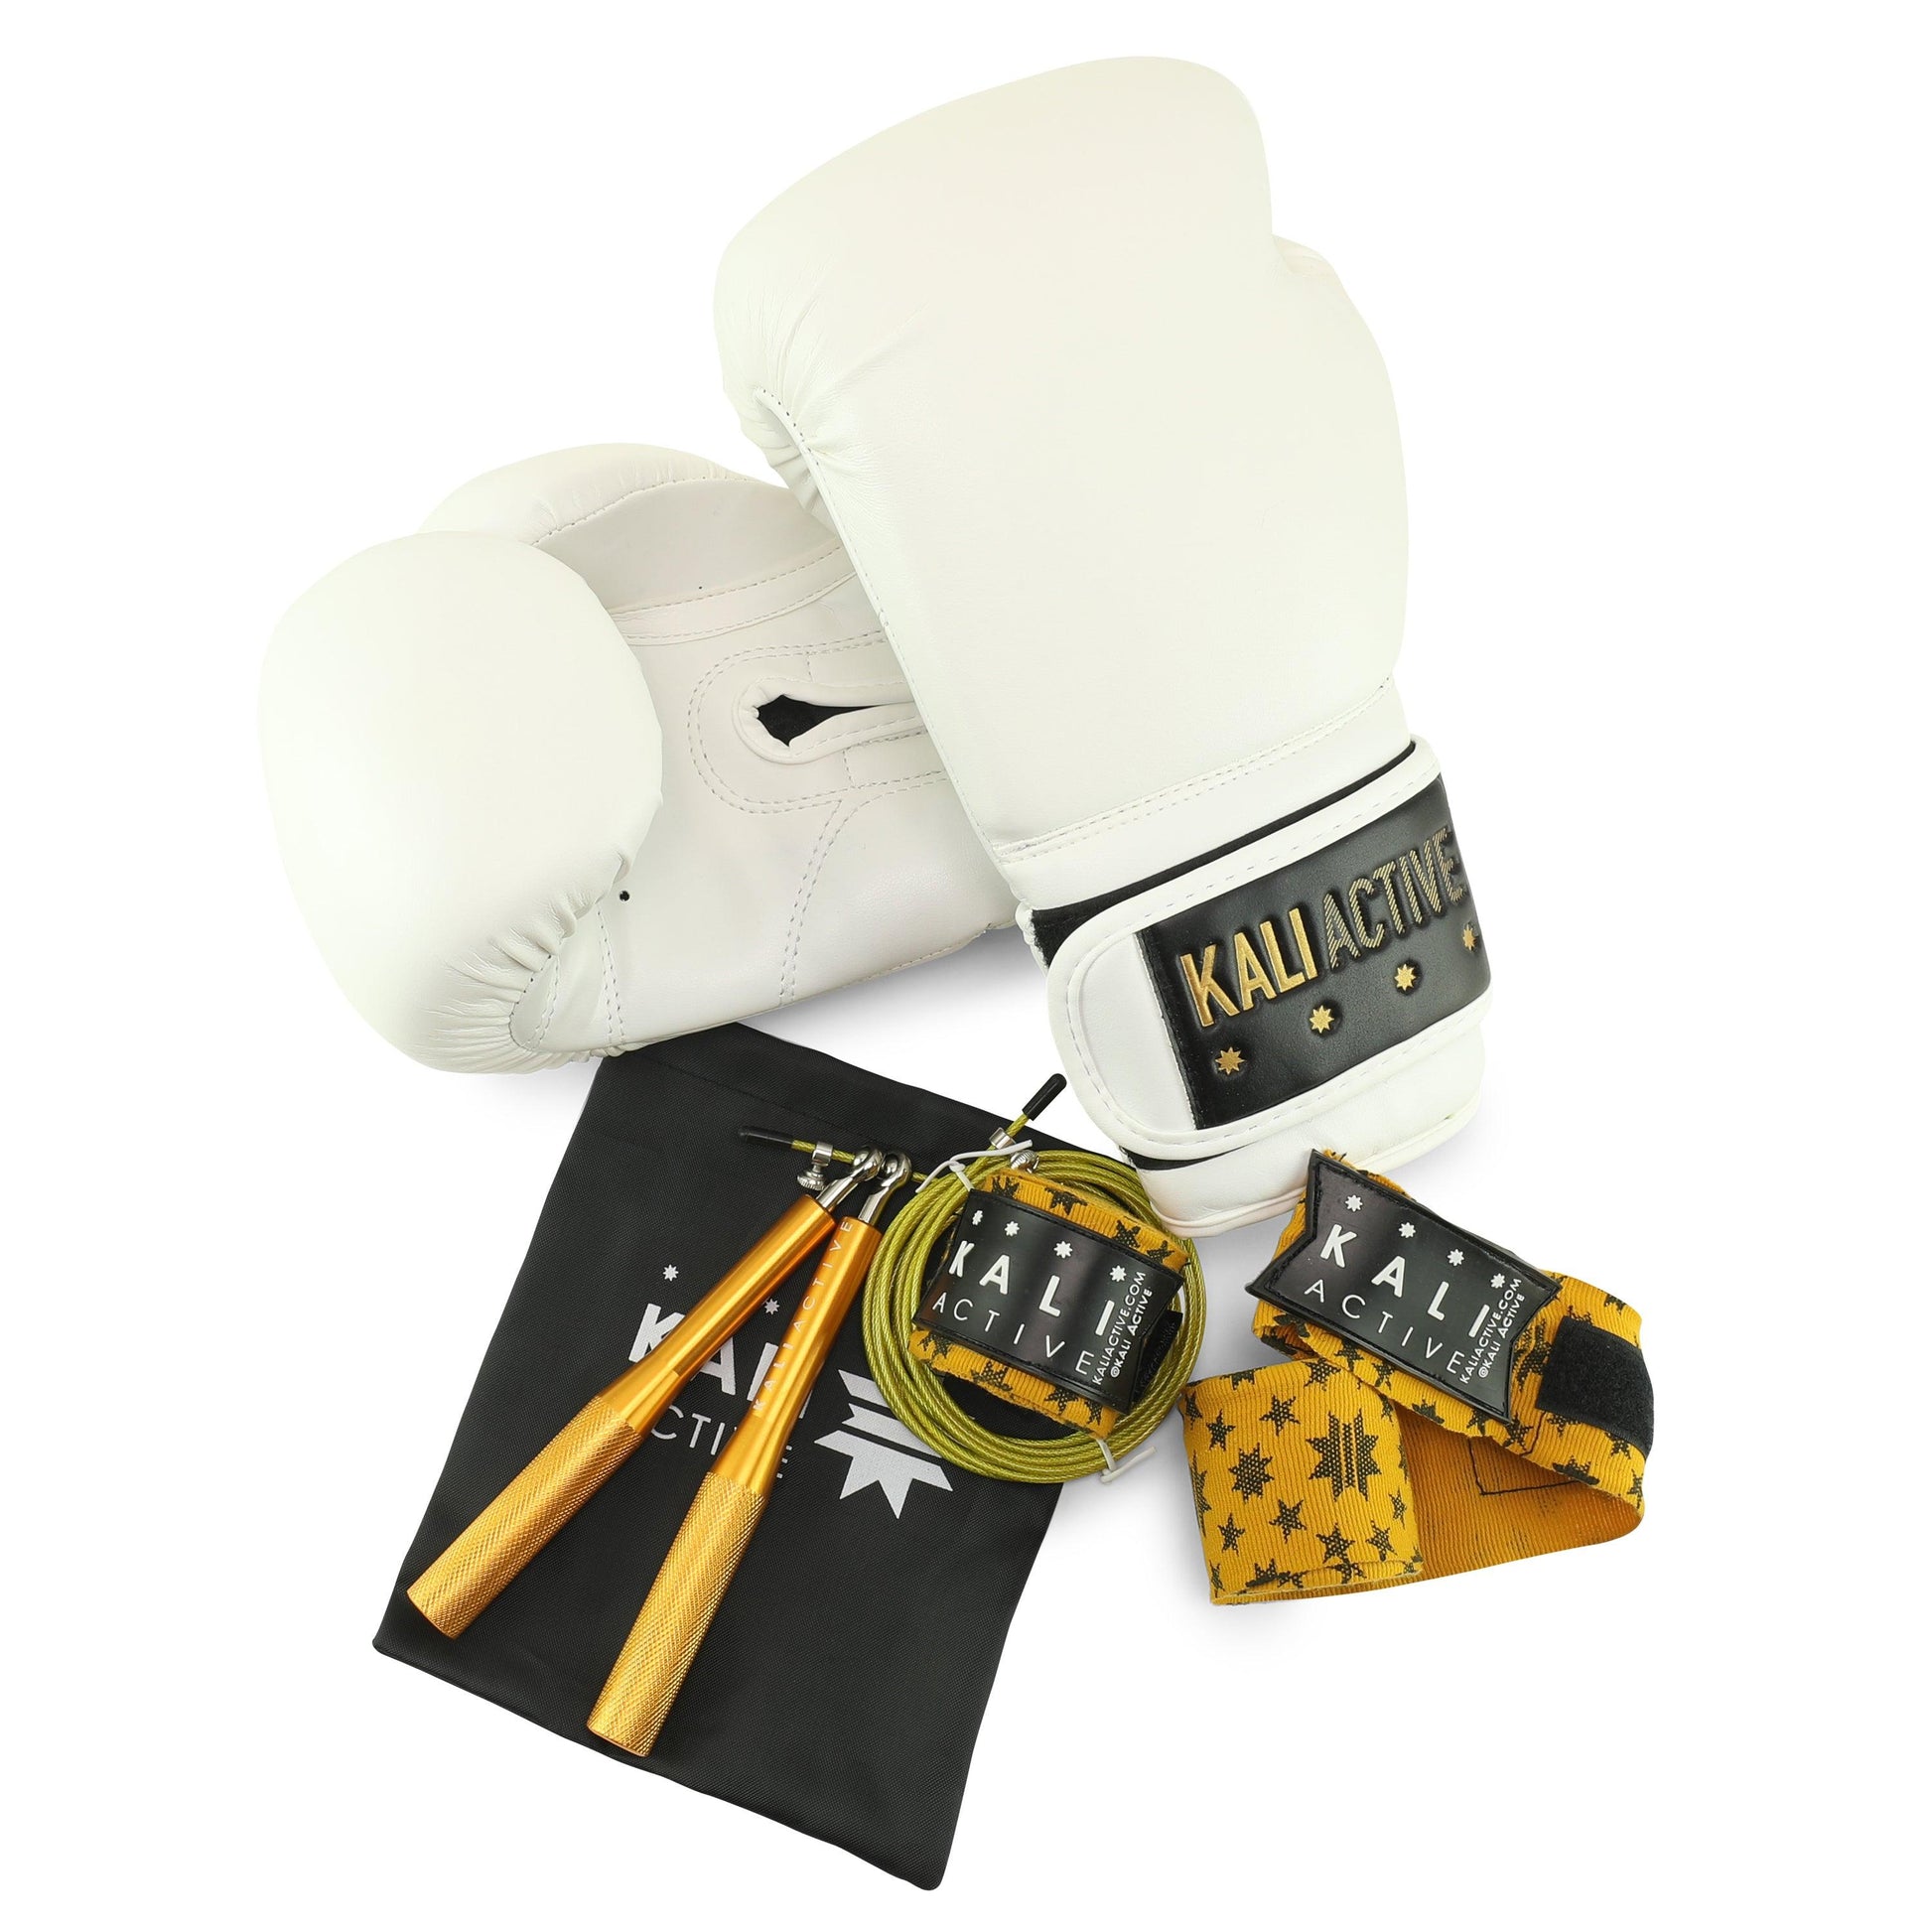 Boxing Gloves (13 photos) - Photography and Web Design - Los Angeles, US based Shopify Experts Revo Designs